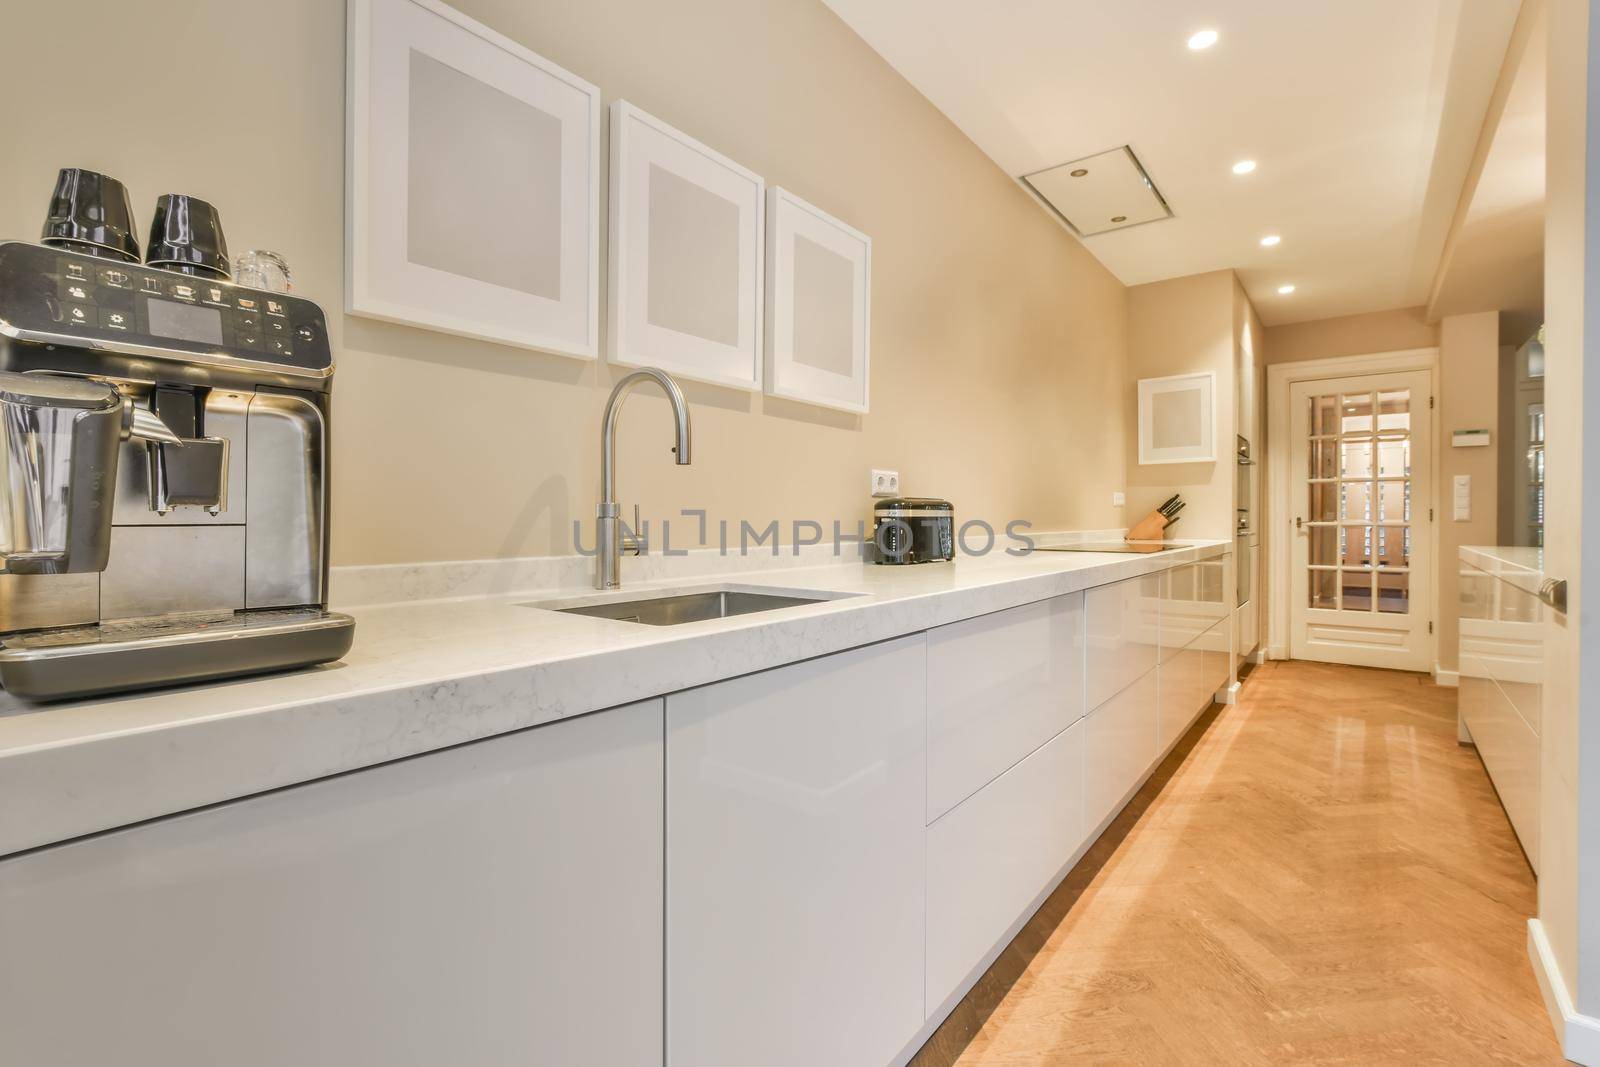 Interior of the light kitchen with modern appliances in a modern flat at daytime